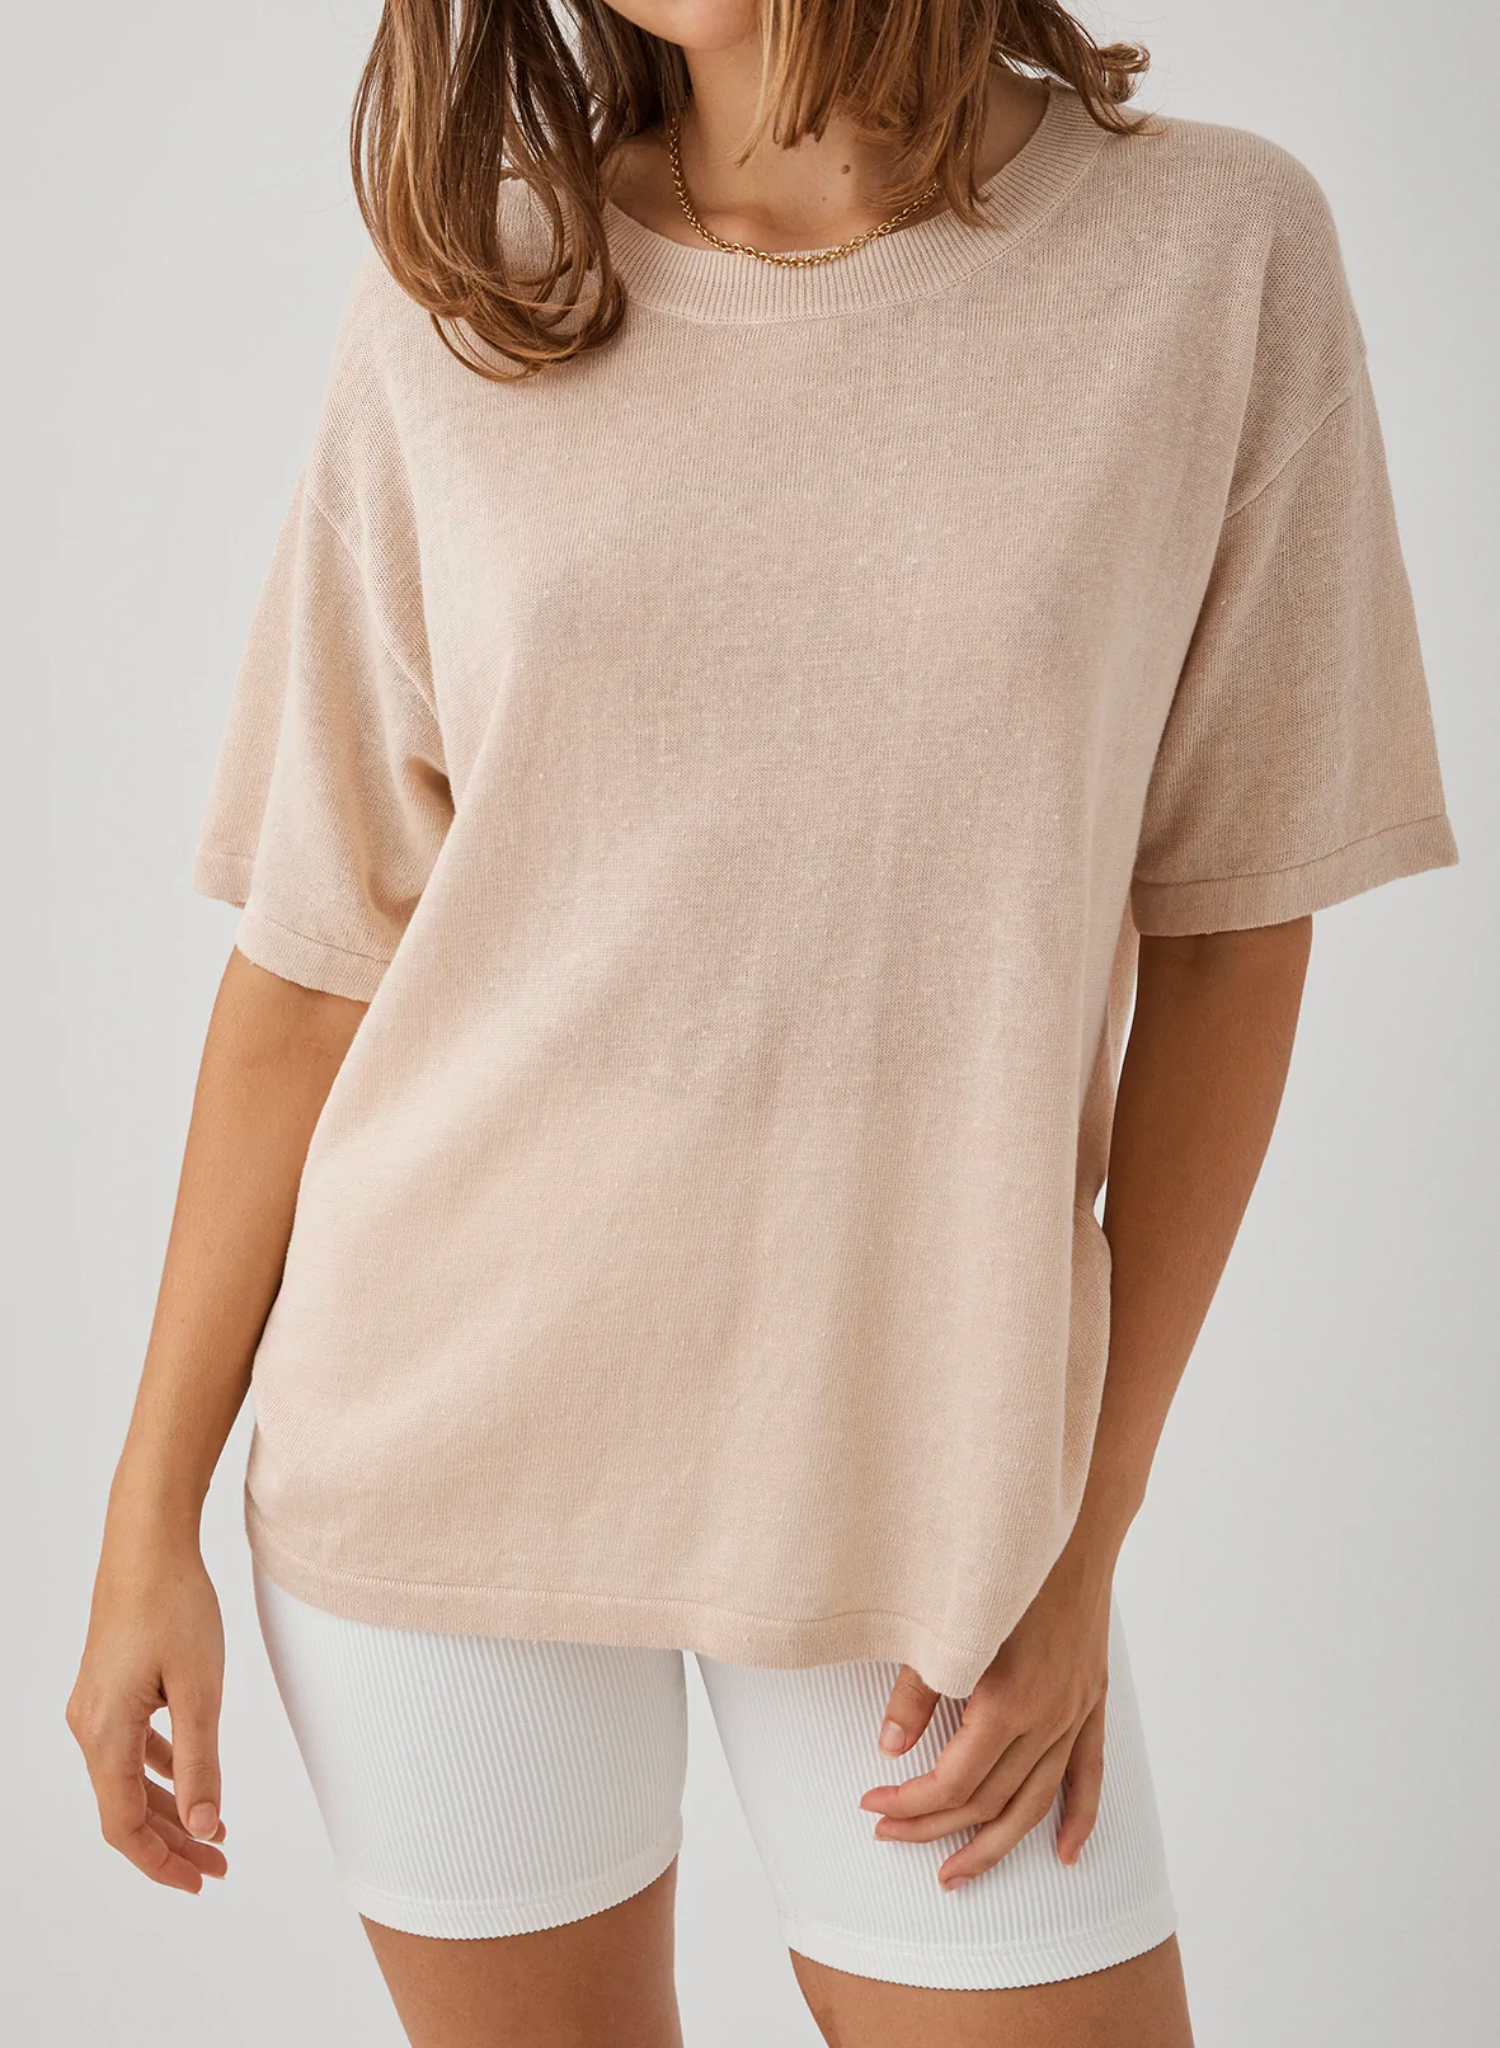 Hugo T-Shirt in Sand. 100% Linen knit. Oversized, classic tee shape. Wide crew neck Zero waste knit construction Soft hand feel Ethically produced Free of harmful chemicals: OEKO-TEX Standard 100